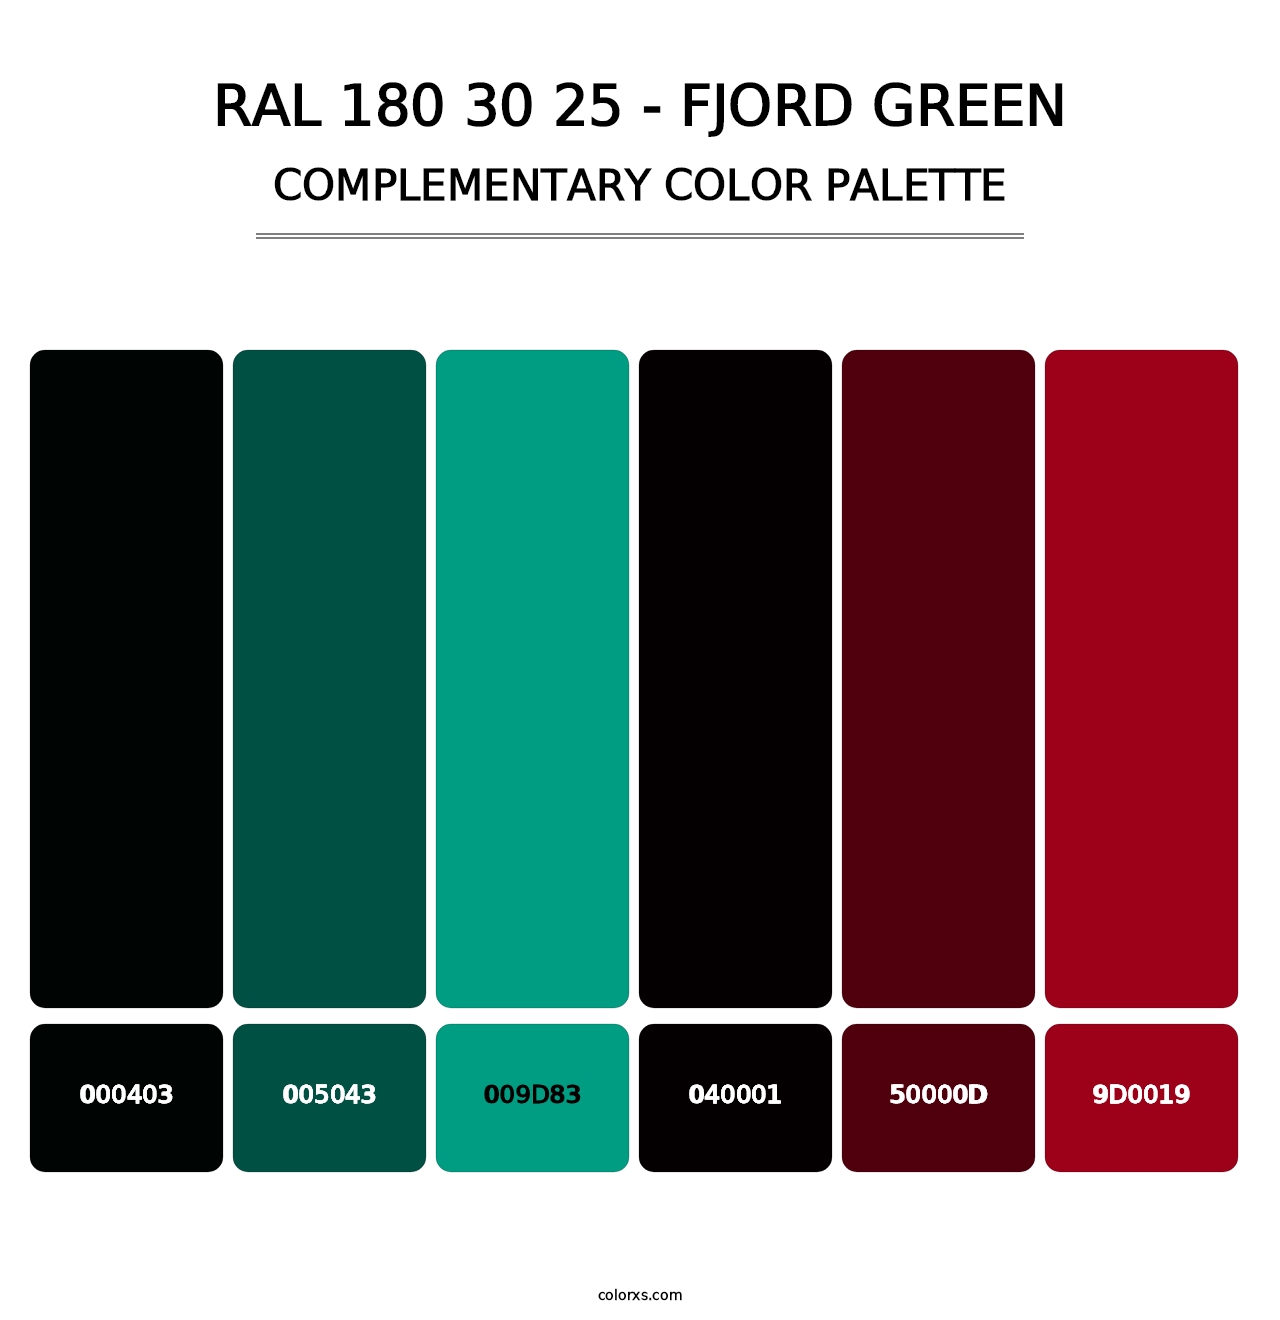 RAL 180 30 25 - Fjord Green - Complementary Color Palette